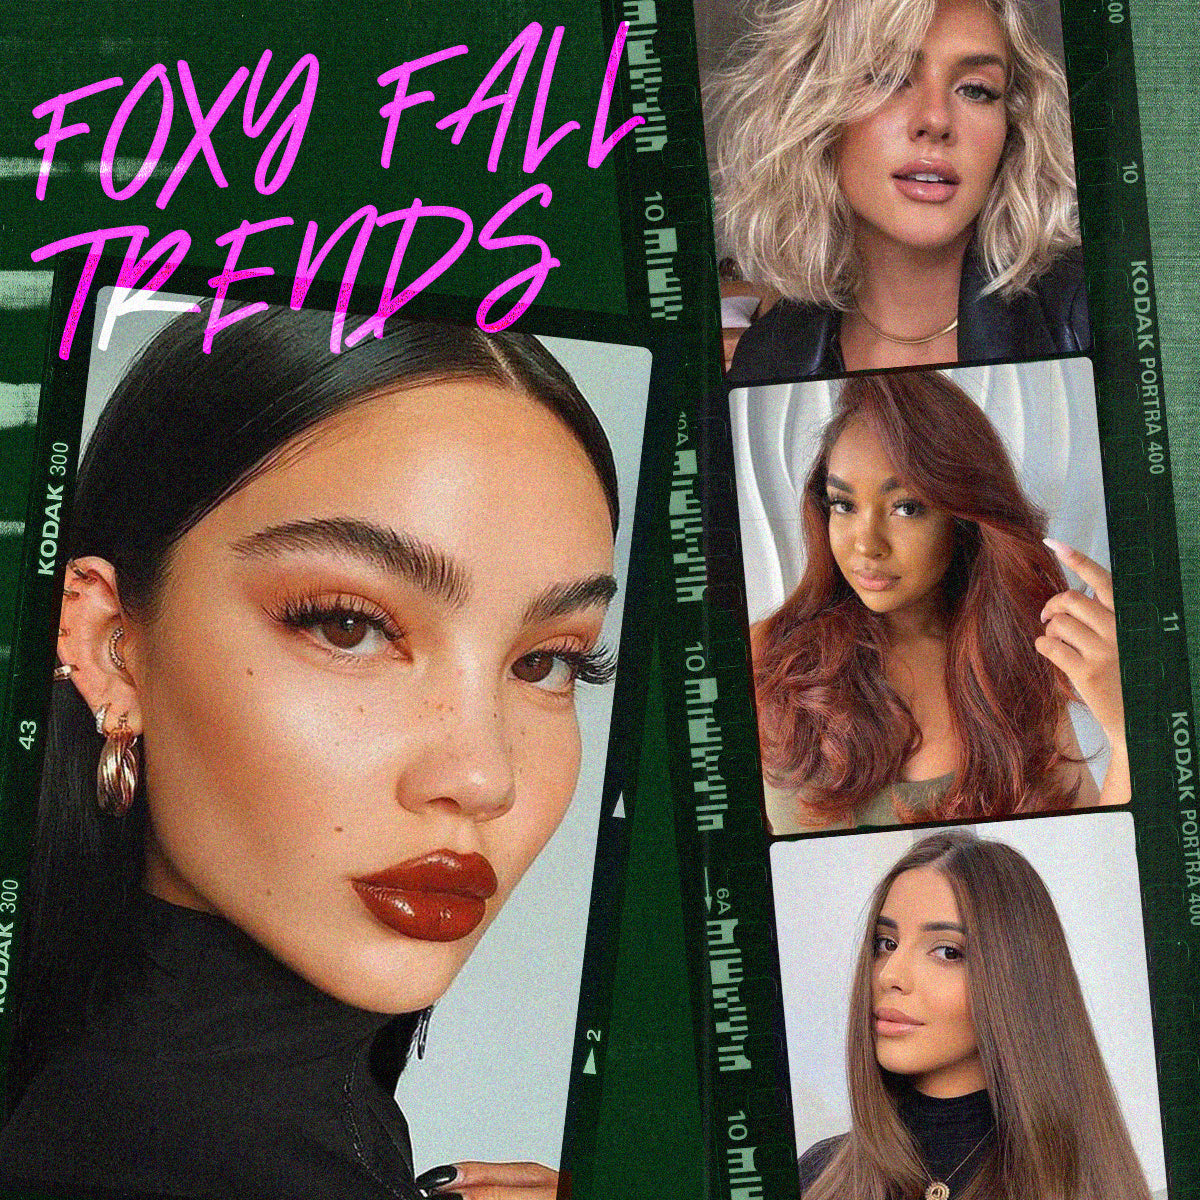 foxy fall trends image with hairstyles